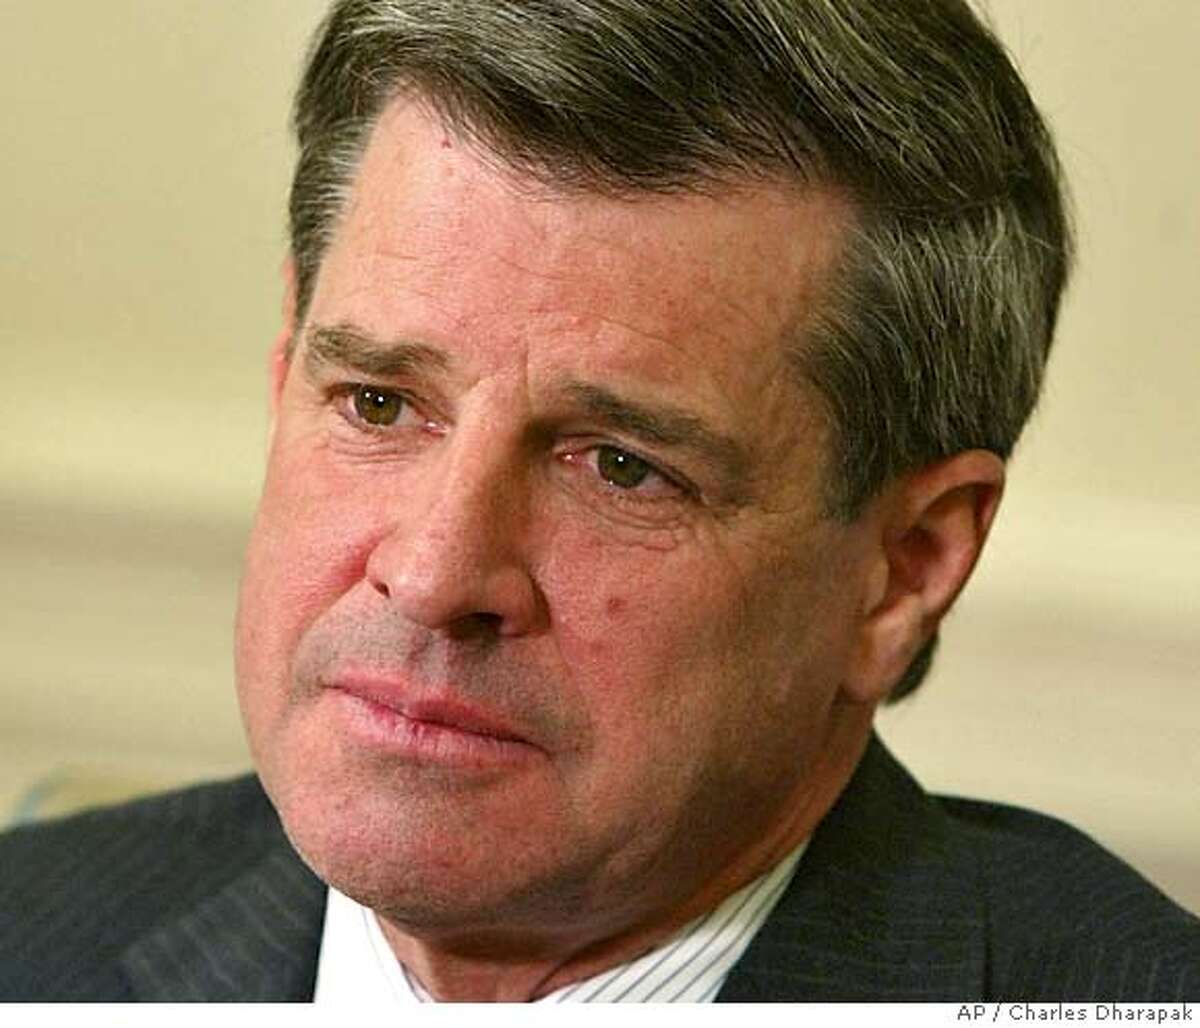 ** FILE ** L. Paul Bremer, the top U.S. civilian official in Iraq, listens as President Bush (not pictured) speaks to reporters during their meeting in the Oval Office of the White House in this Oct. 28, 2003 photo in Washington. The White House refused to say Tuesday, Oct. 5, 2004, whether Bremer had asked Bush for more troops to deal with the rapid descent of postwar Iraq into chaos. (AP Photo/Charles Dharapak, File) OCT. 28, 2003 FILE PHOTO Nation#MainNews#Chronicle#10/06/2004#ALL#5star##0422397053